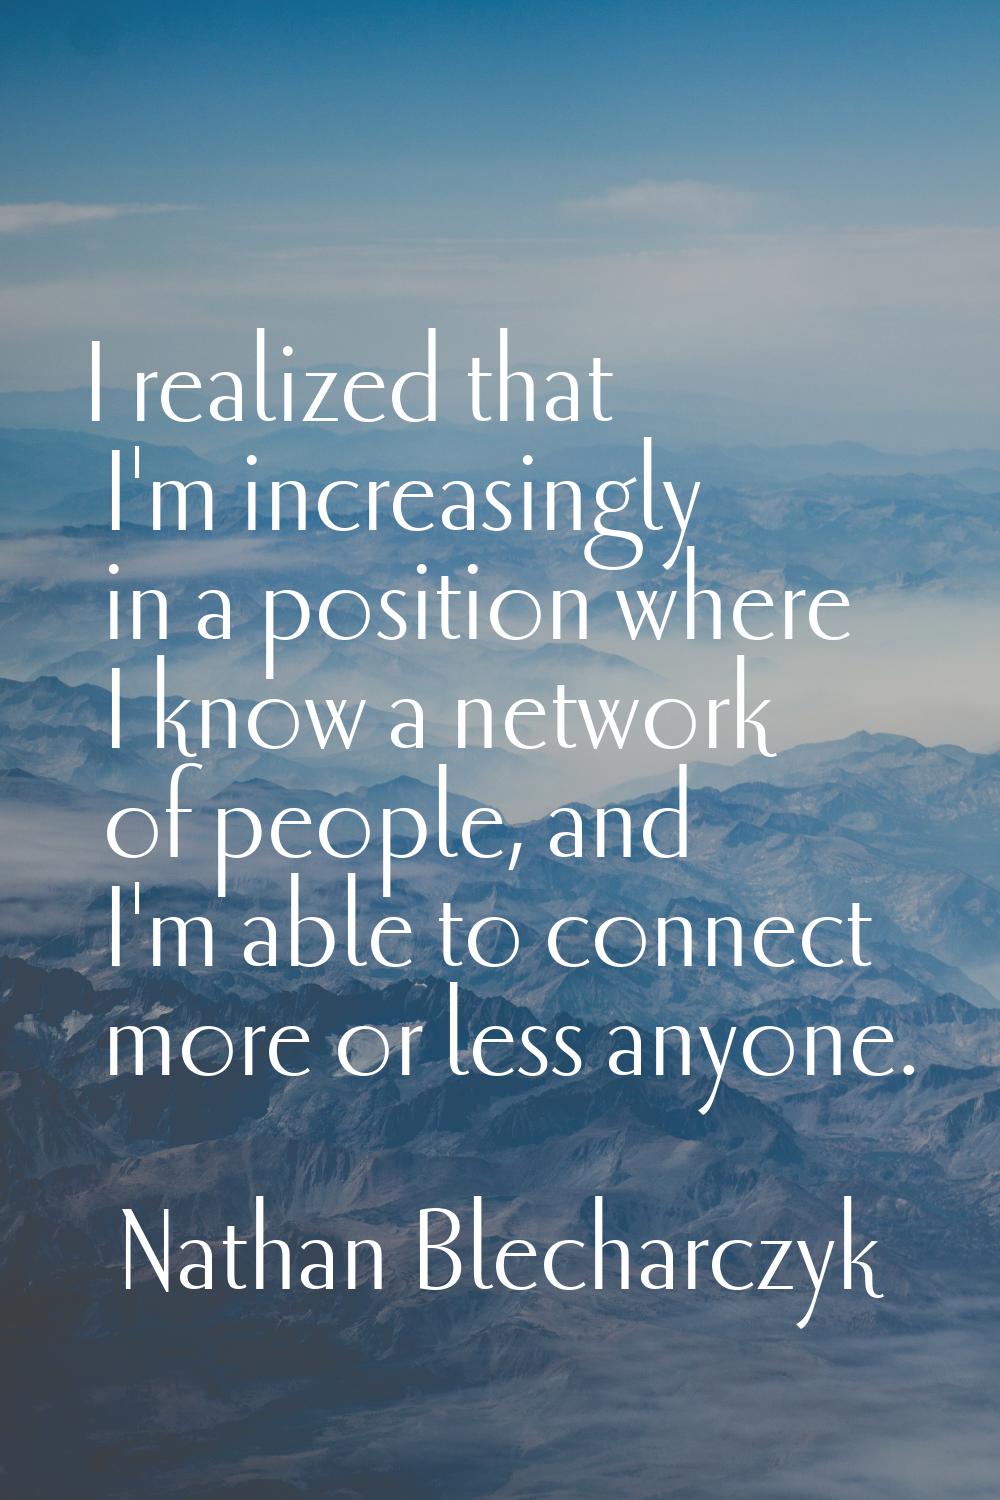 I realized that I'm increasingly in a position where I know a network of people, and I'm able to co